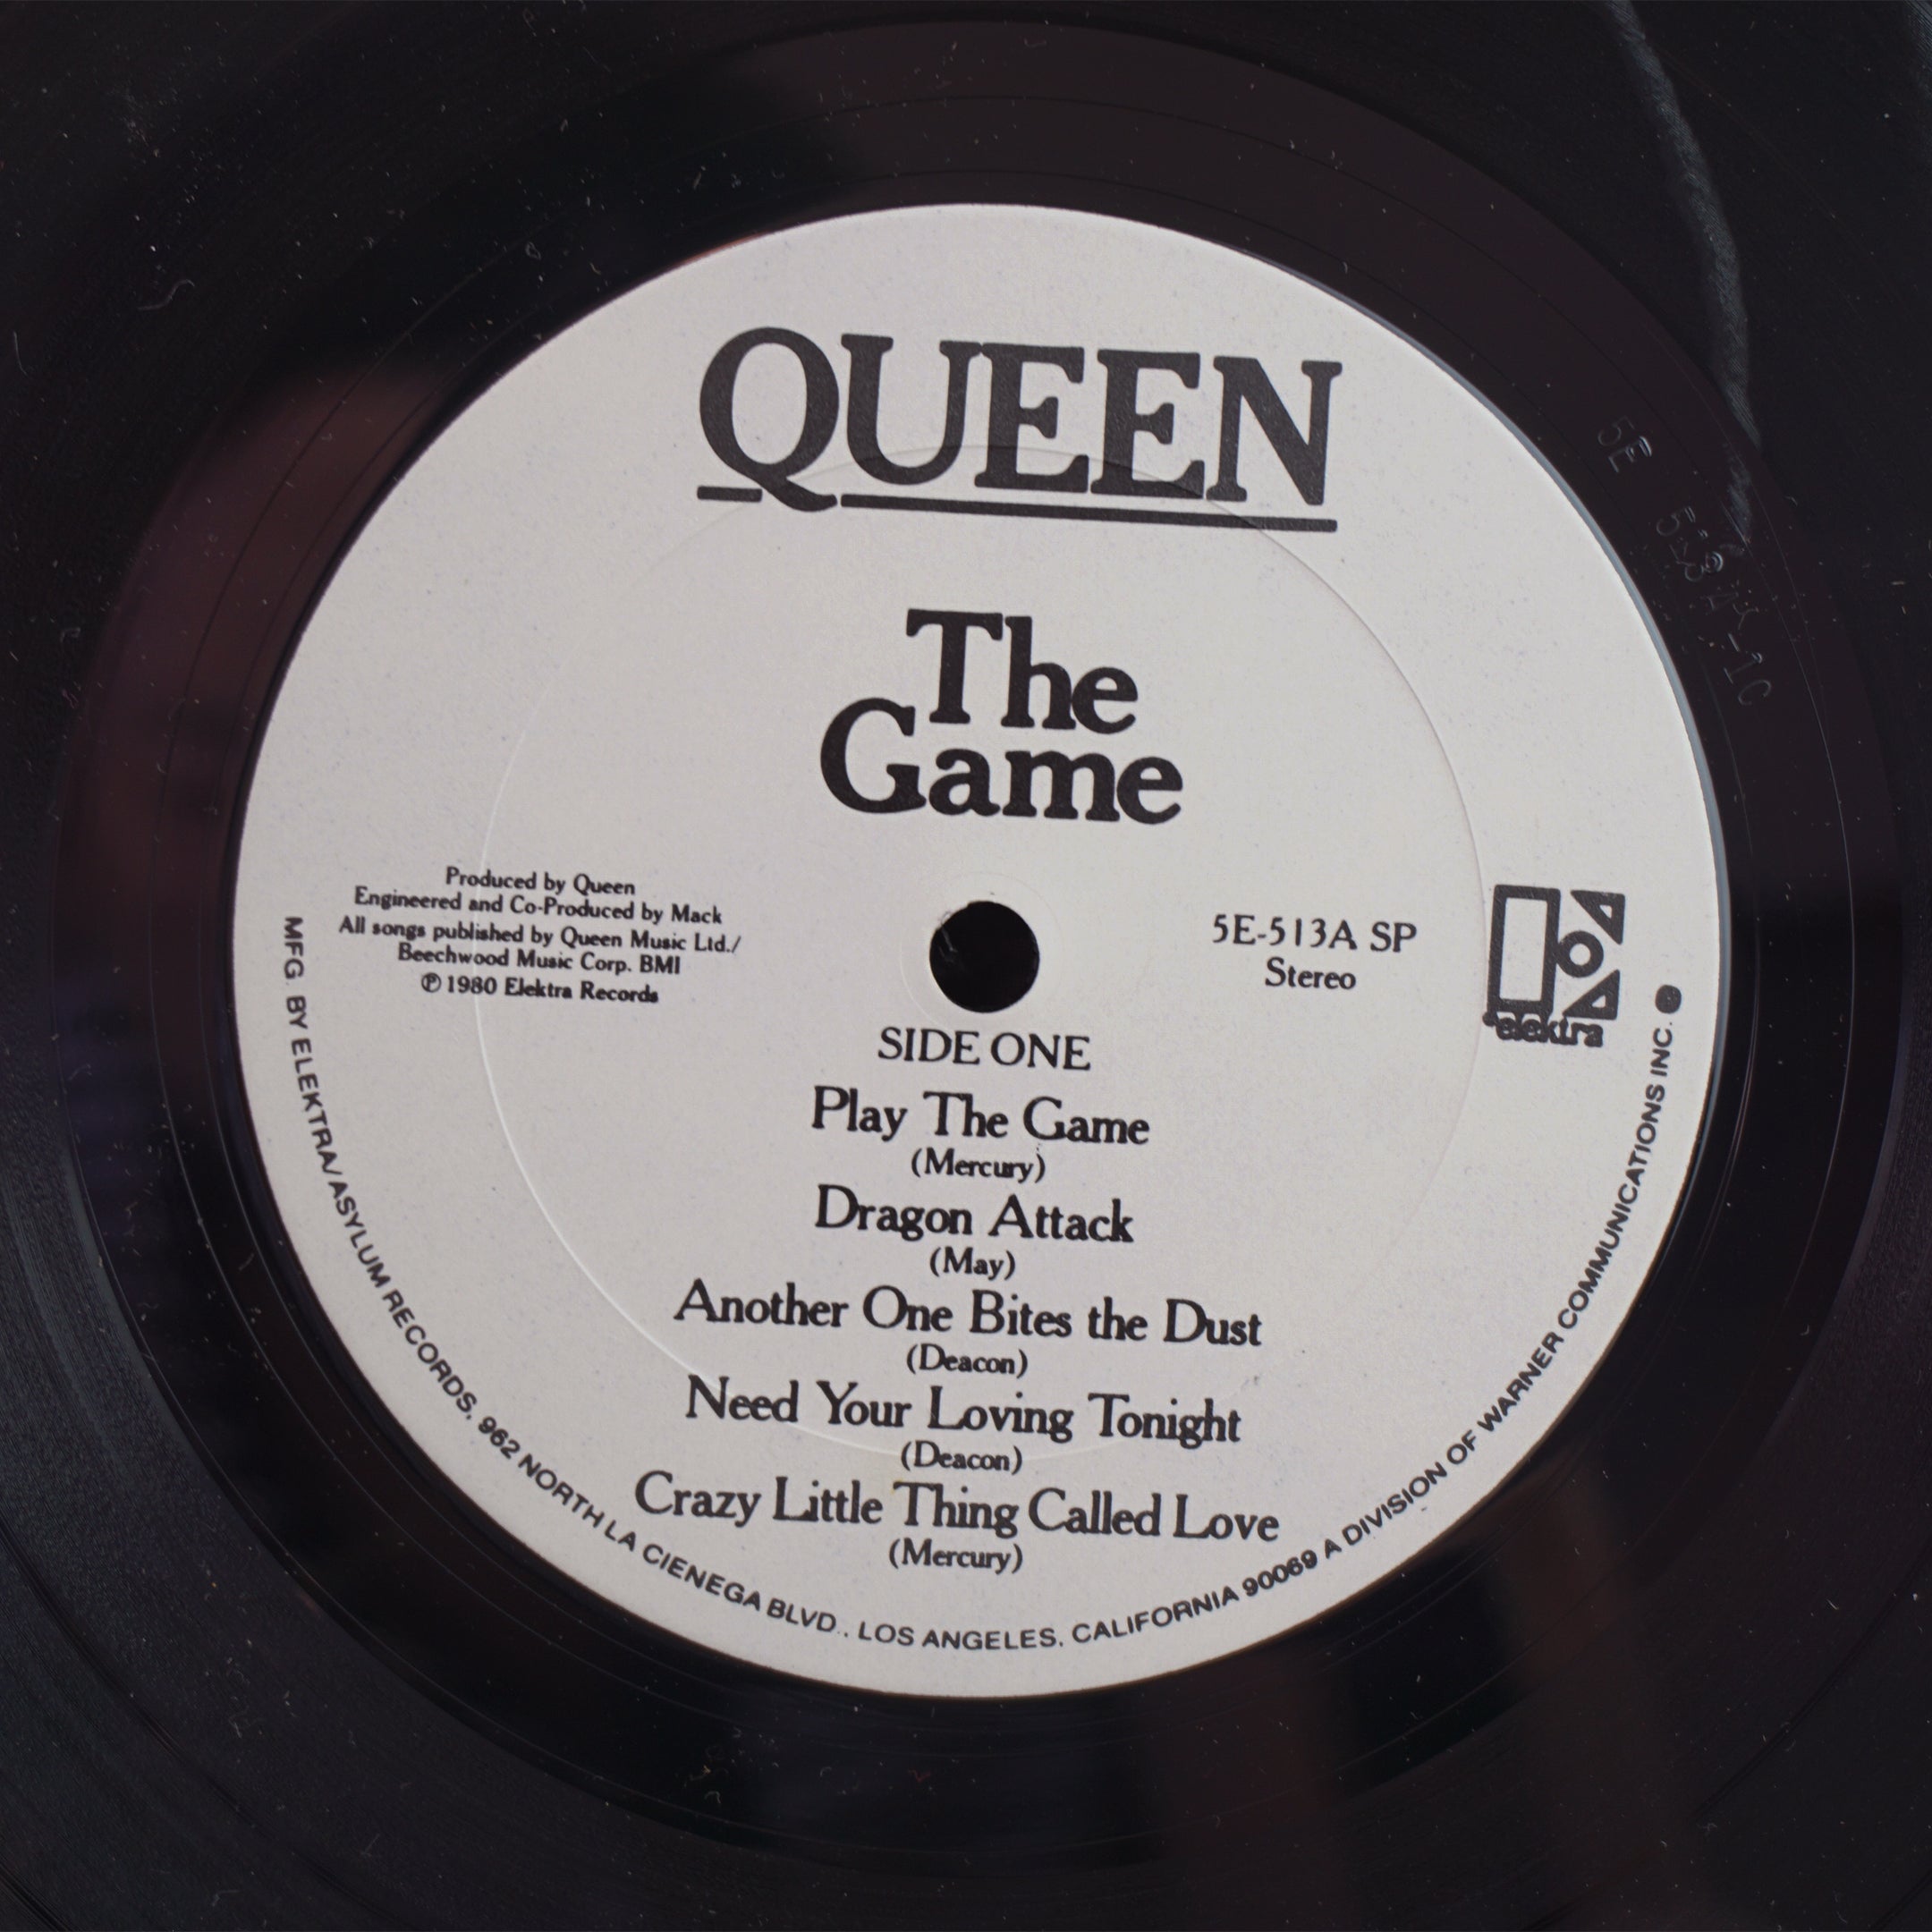 Queen Greatest Hits 1981 - Vintage Vinyl LP Record Elektra - Near Mint  Condition - Free Shipping!